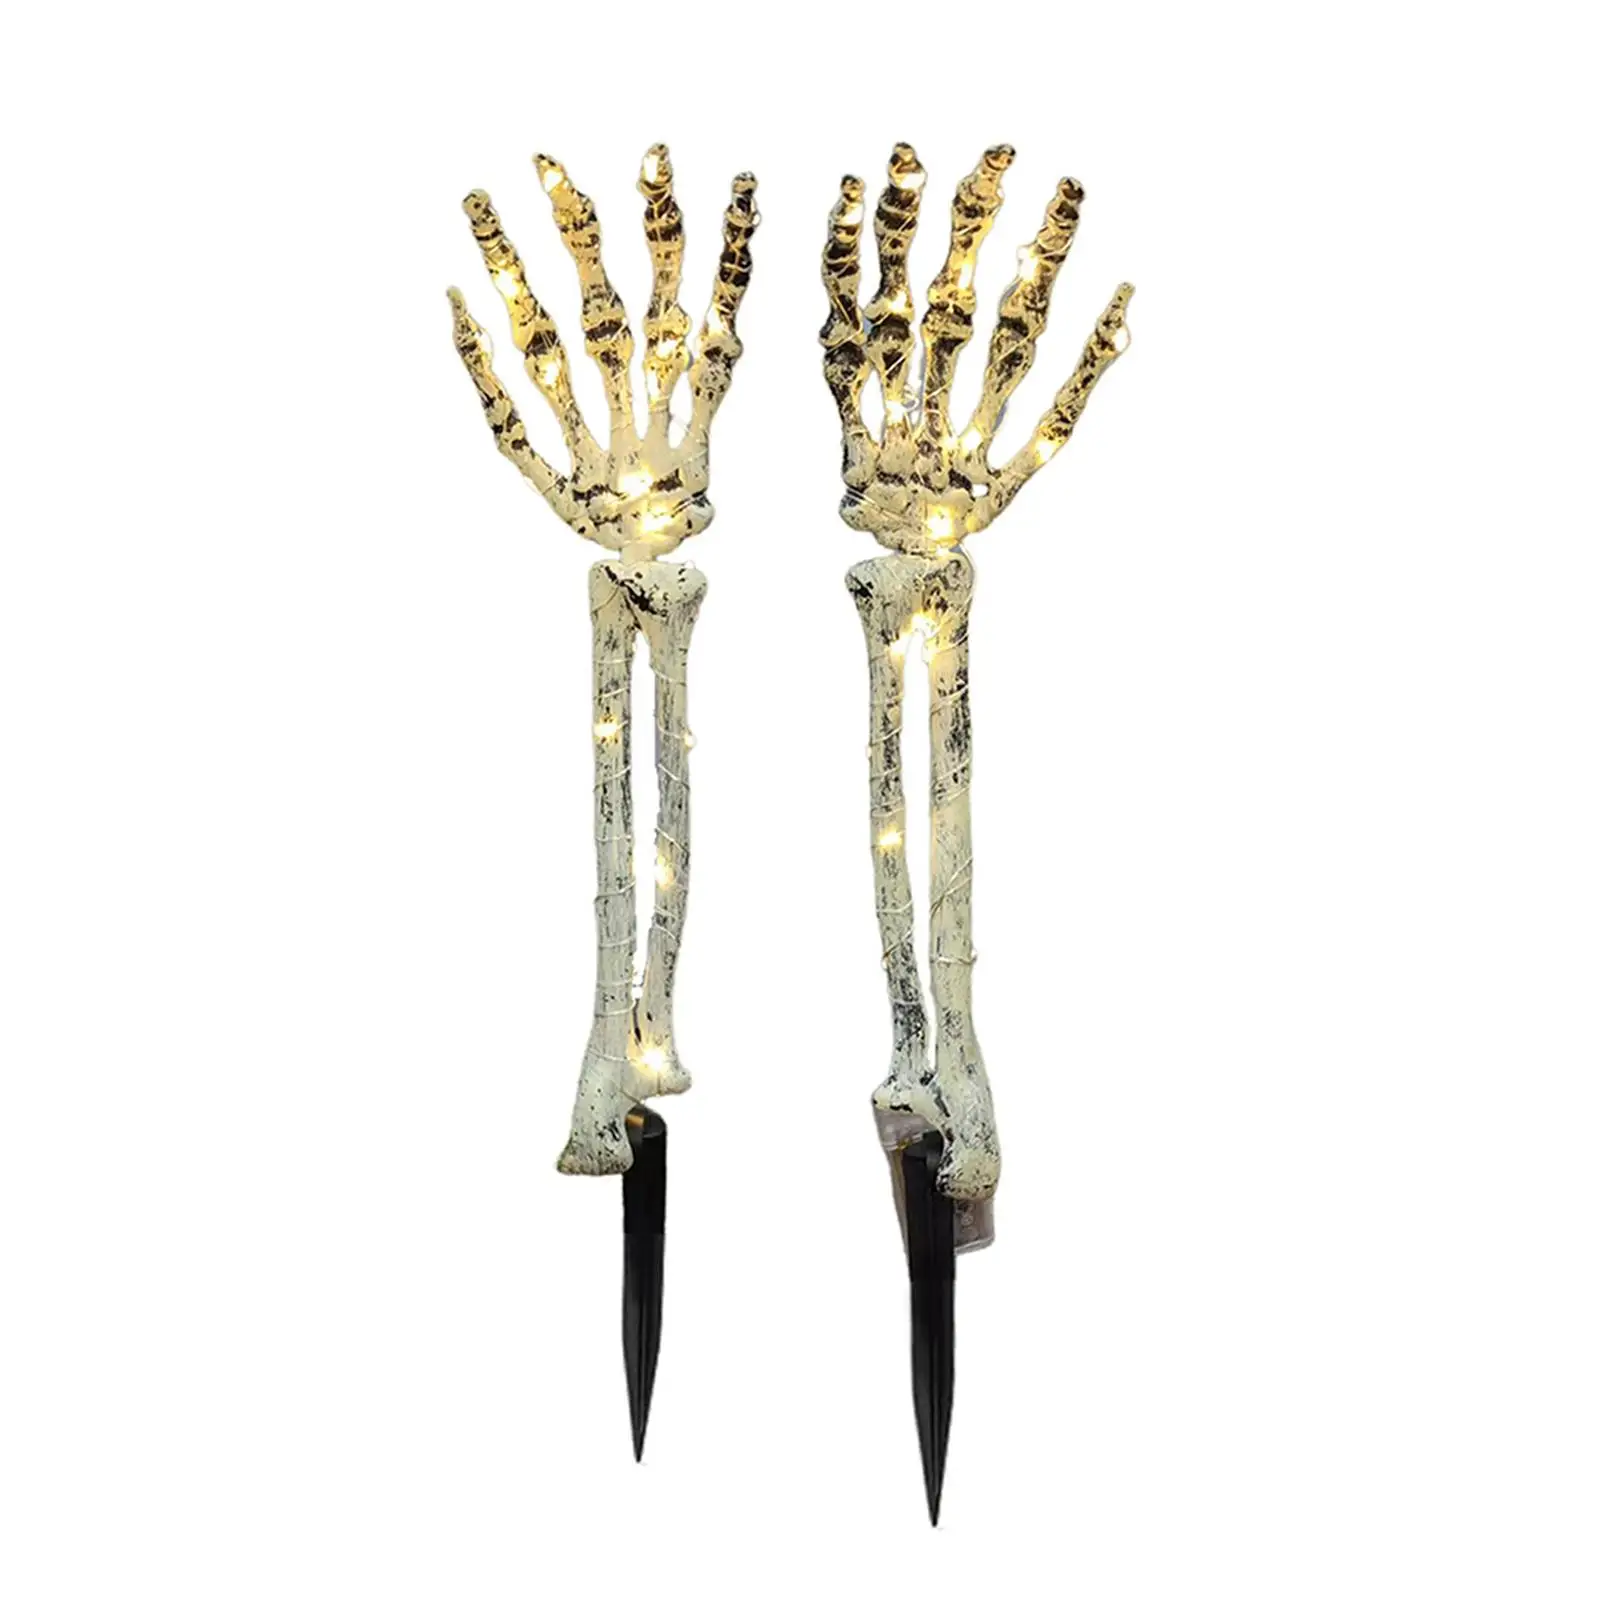 Halloween Decor Skeleton Arm Stake Photo Props Halloween Decorations for Holiday